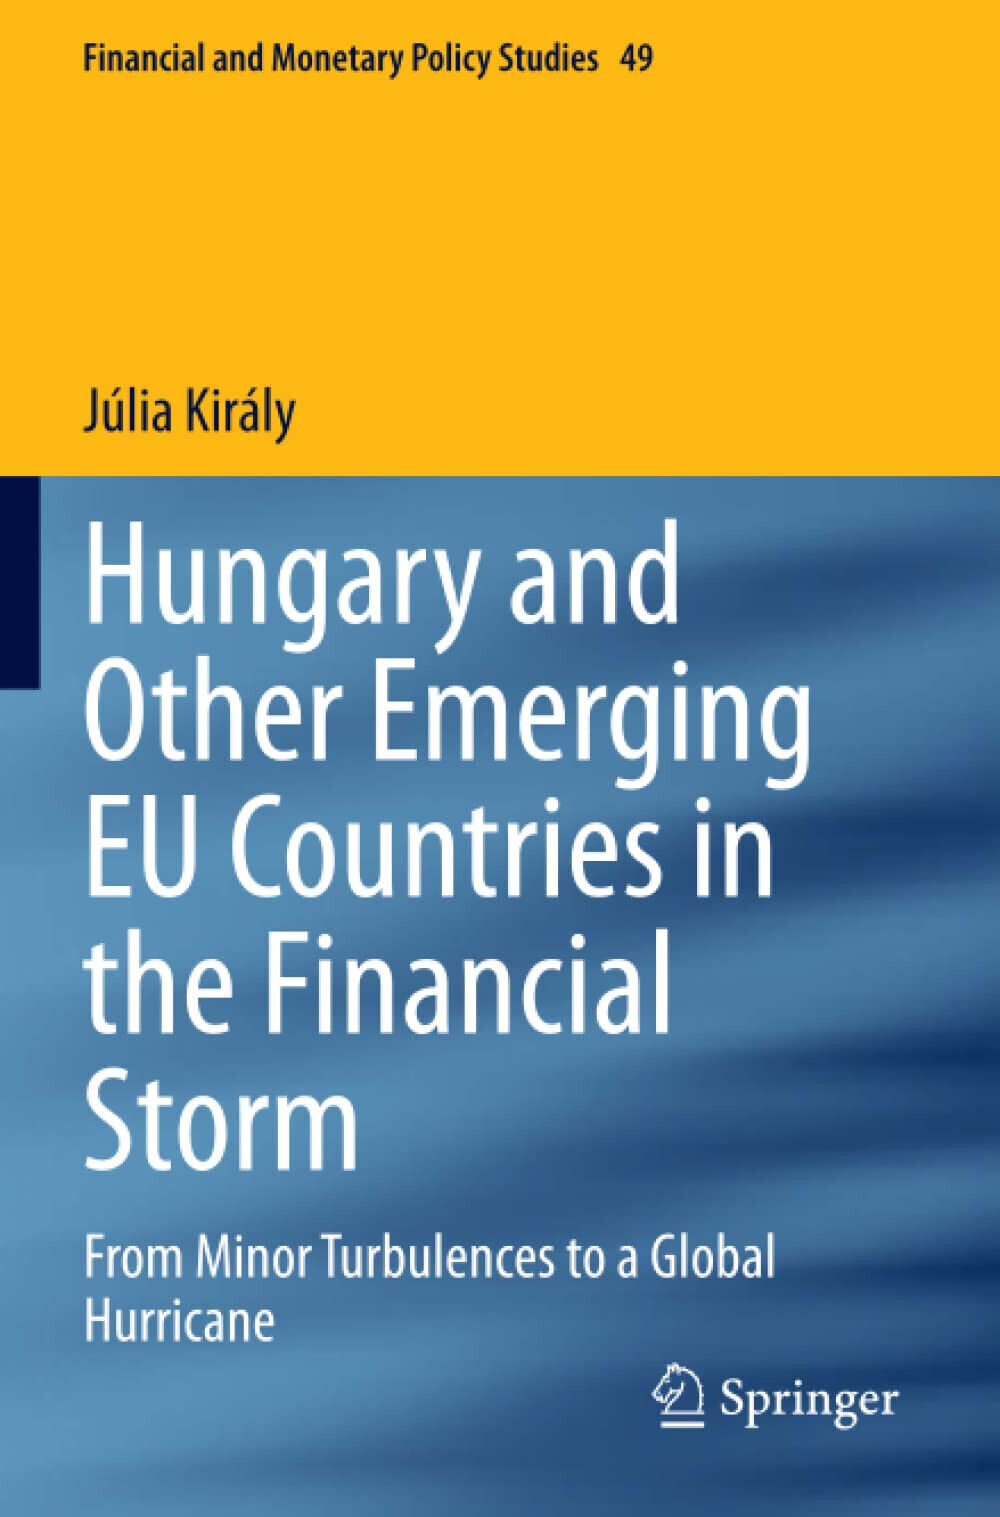 Hungary and Other Emerging EU Countries in the Financial Storm - Springer, 2021